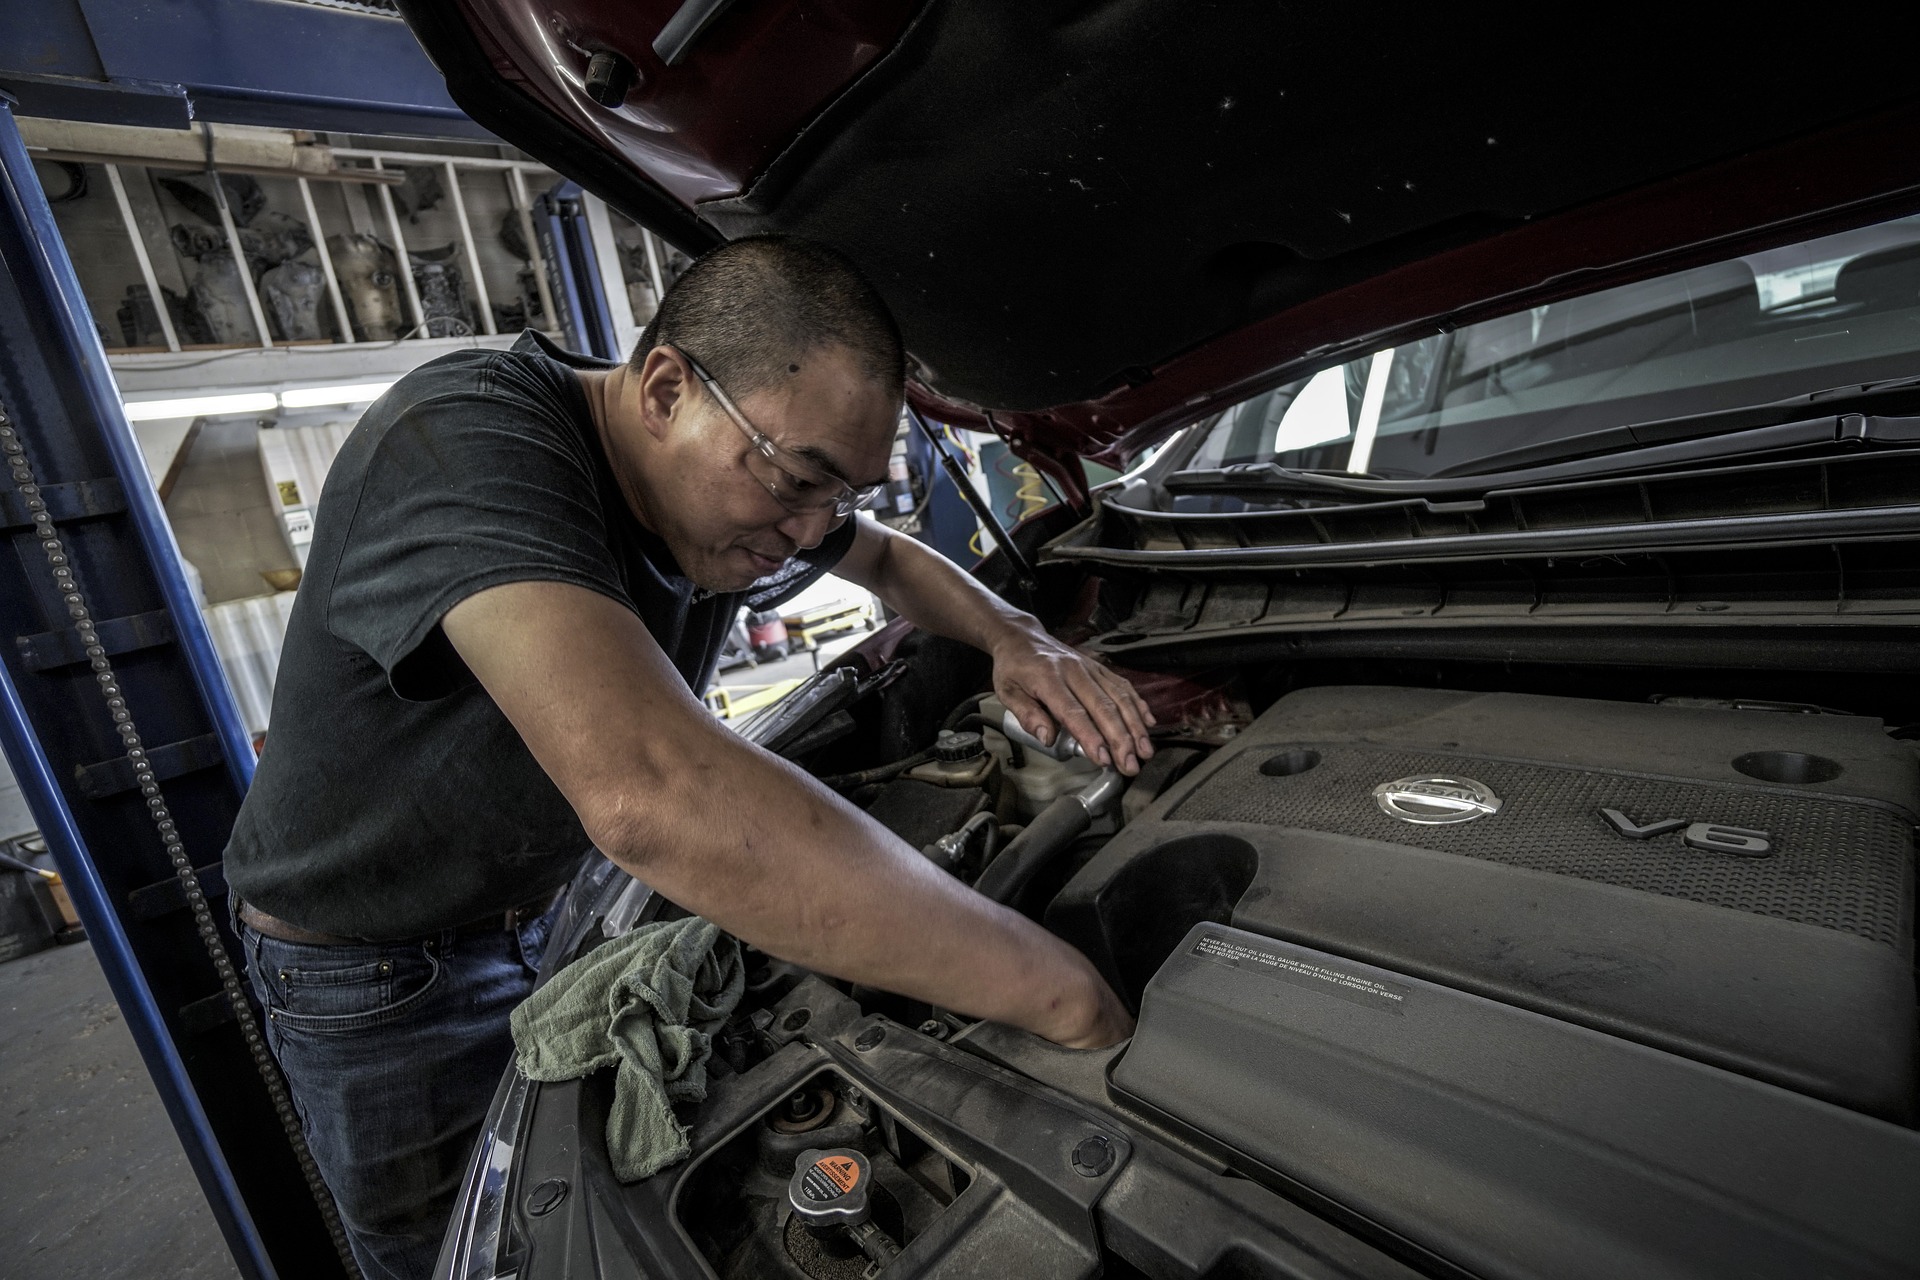 Mechanic with goggles inspecting used car's engine